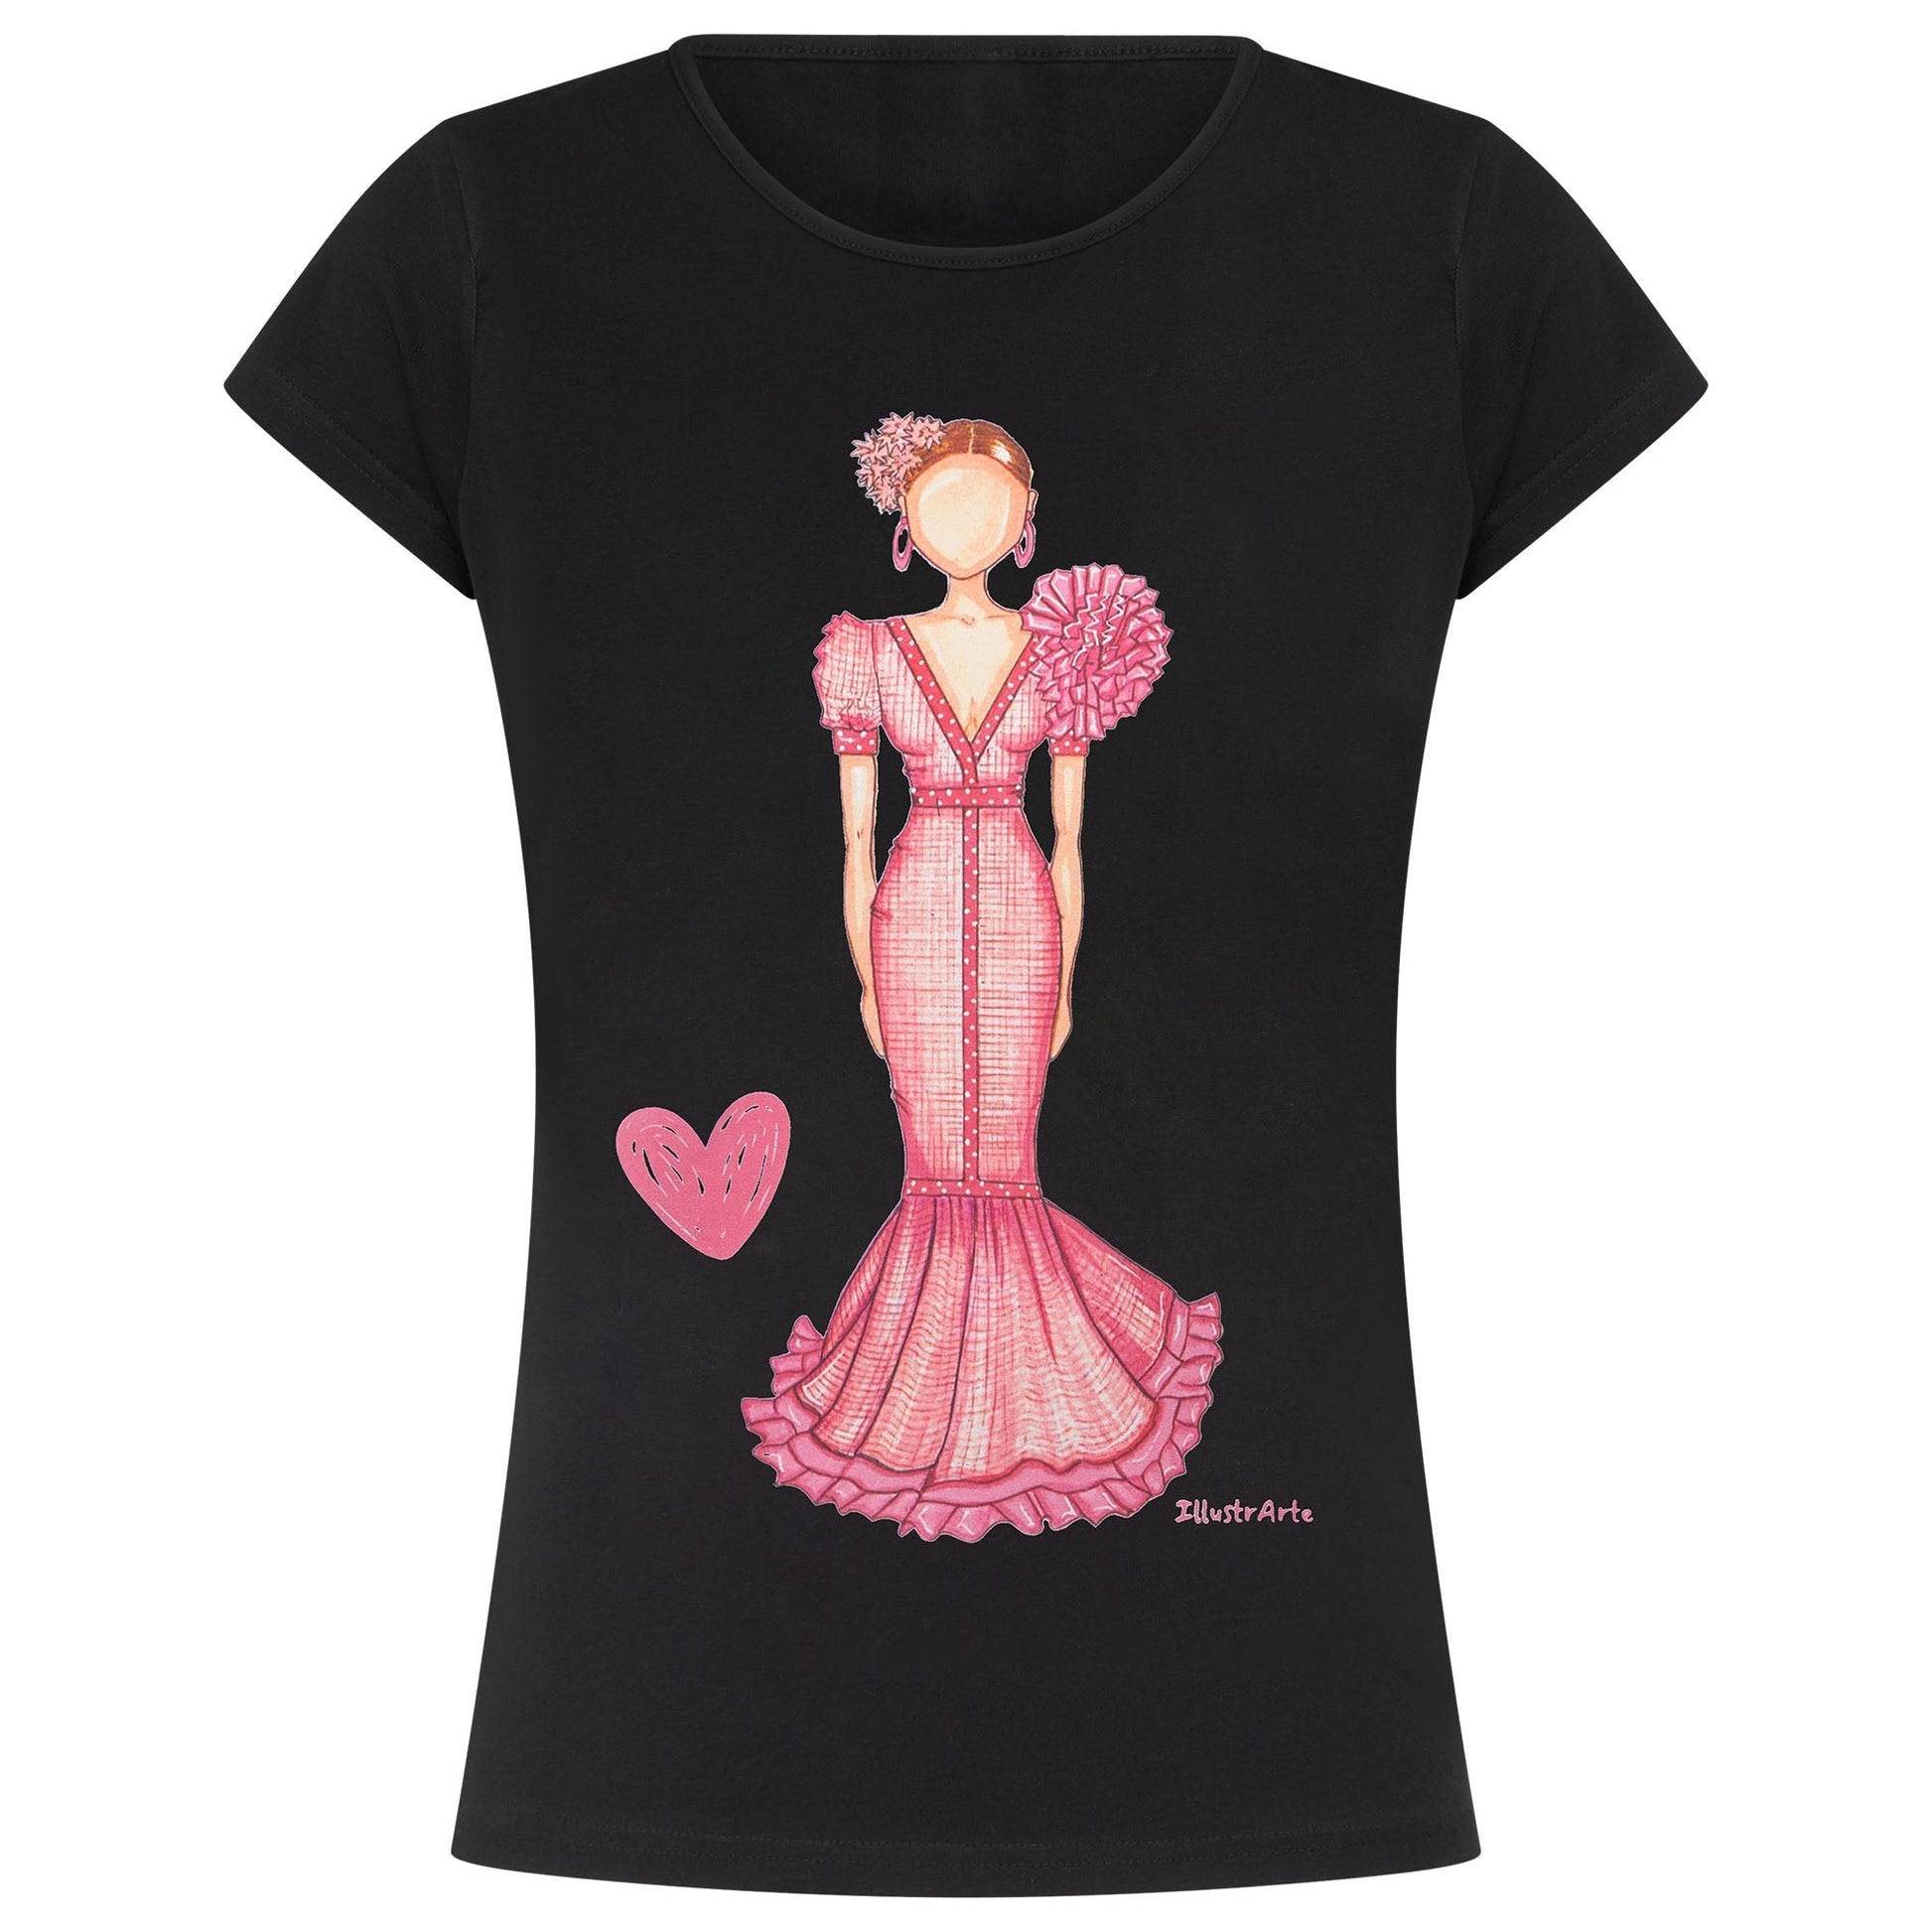 a women's t - shirt with a woman in a pink dress